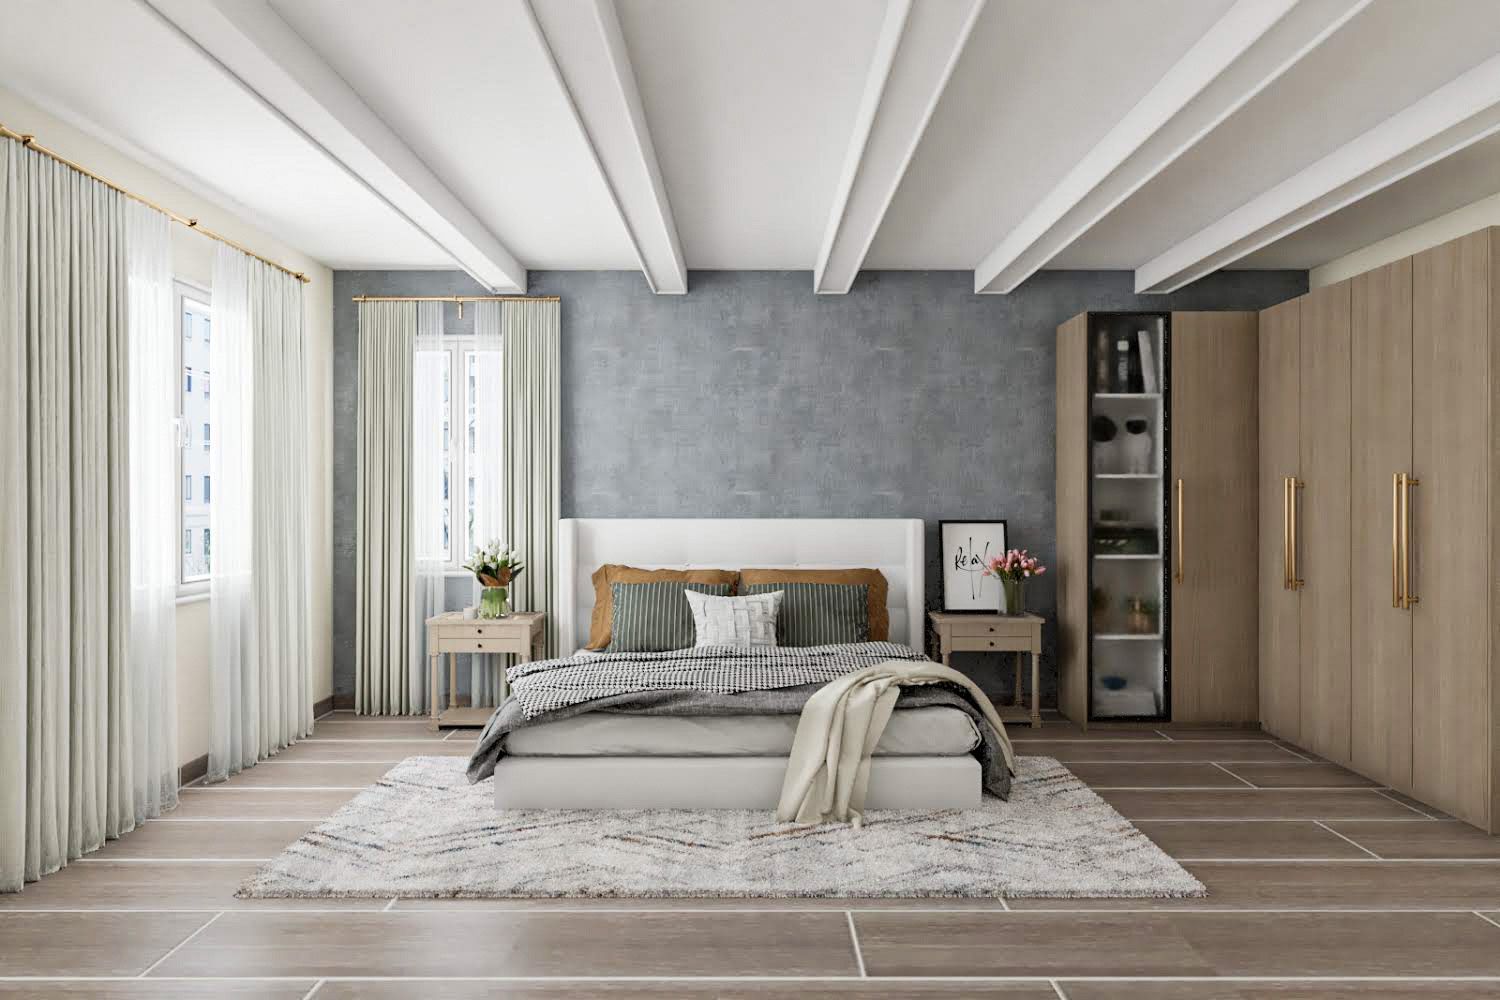 Modern Master Bedroom Design With L Shaped Wooden Wardrobe And Grey Accent Wall